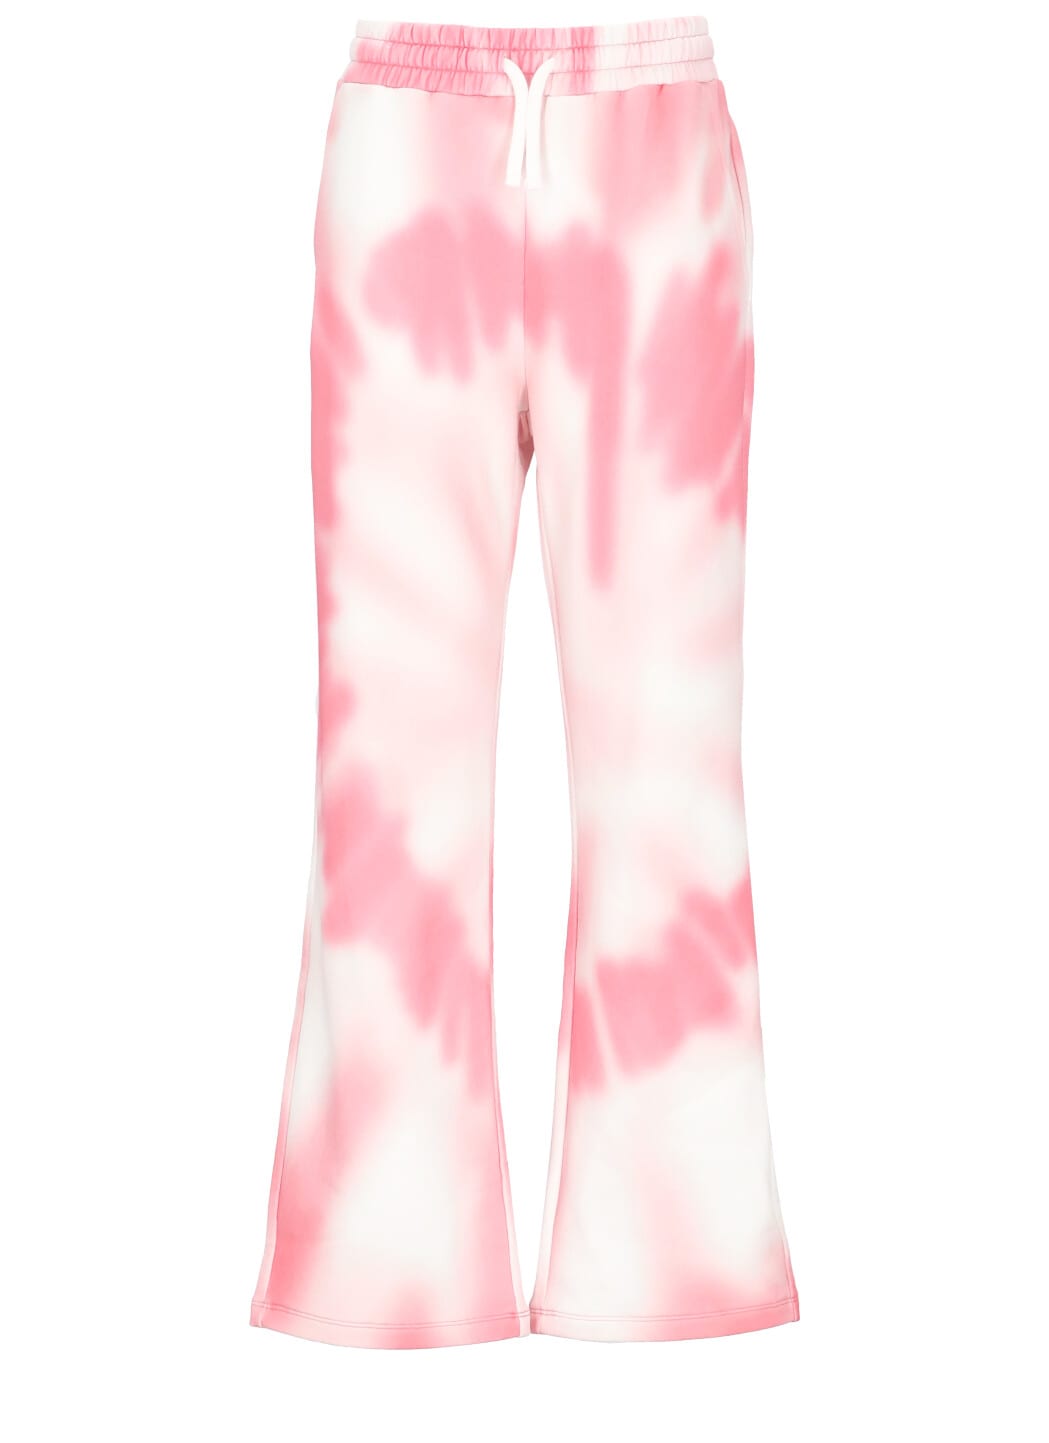 RED Valentino Pants With Tie Dye Print